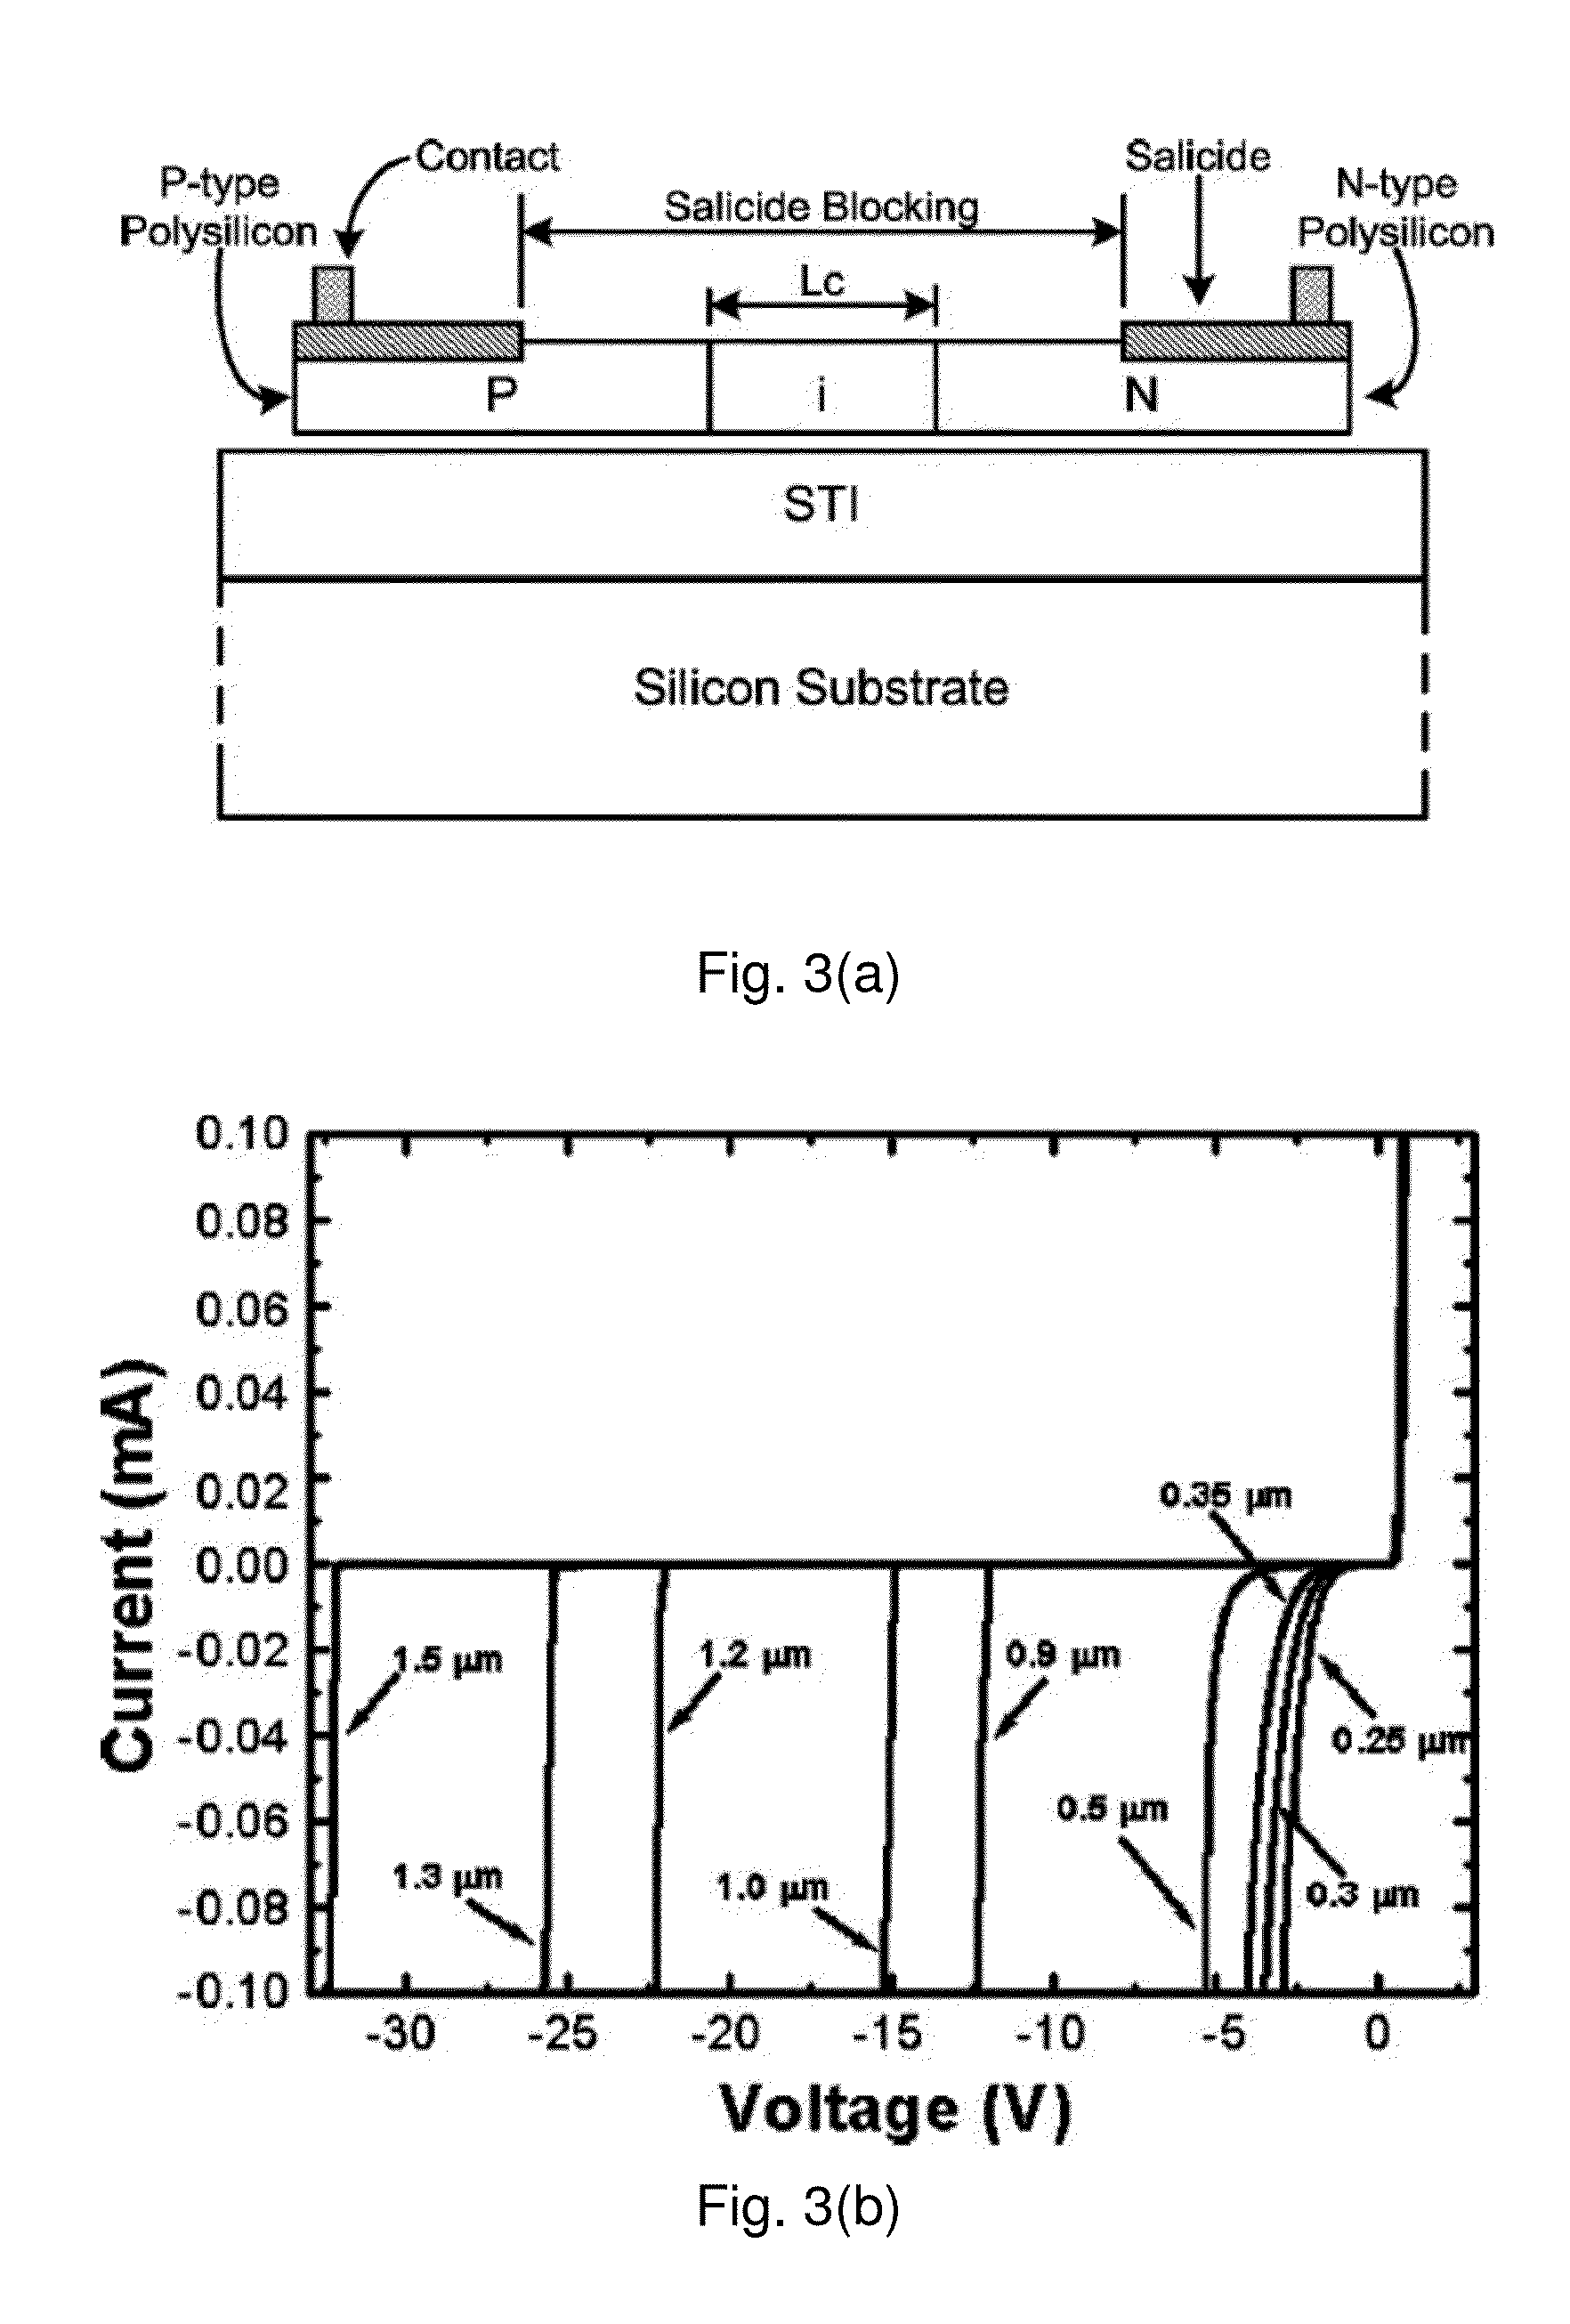 Structures and techniques for using mesh-structure diodes for electro-static discharge (ESD) protection